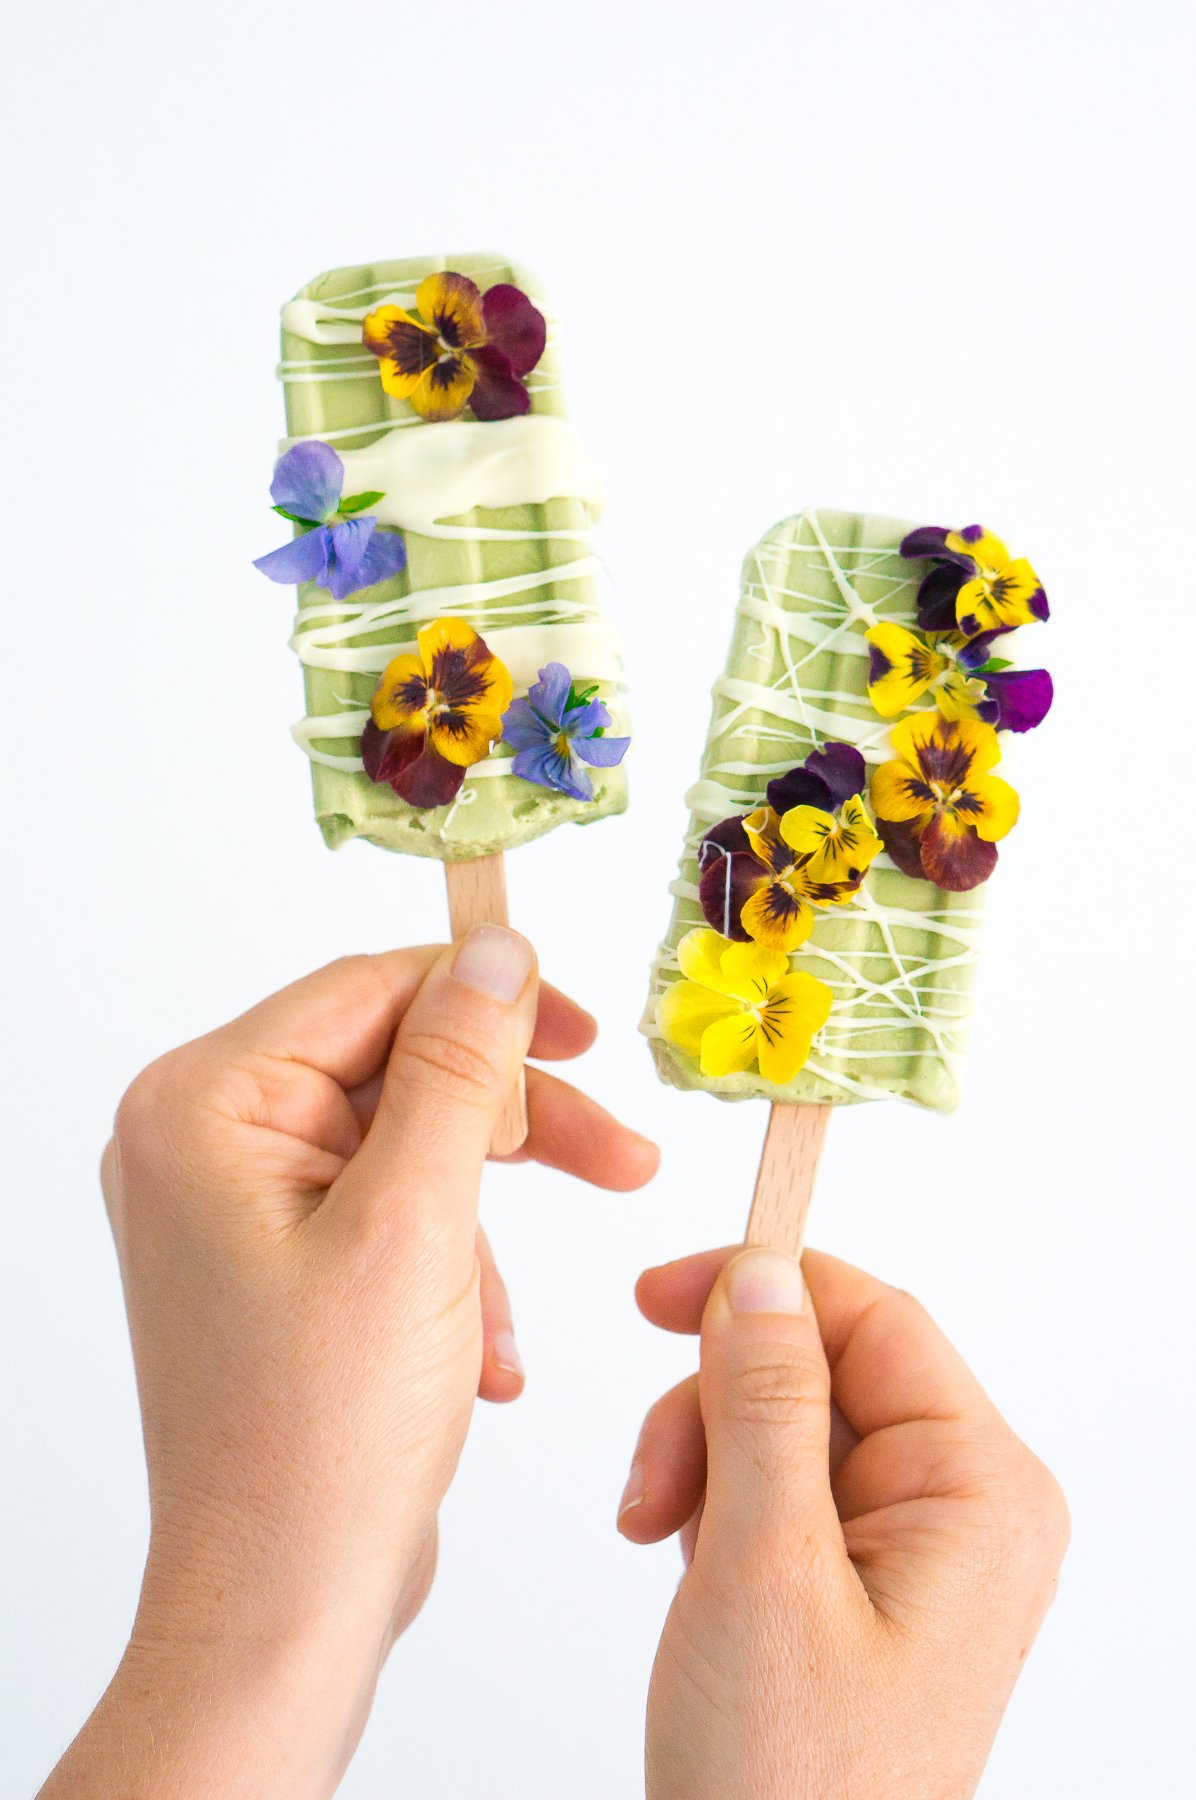 White Chocolate Basil Popsicles with Edible Flowers (Vegan, Gluten Free, Refined Sugar Free)